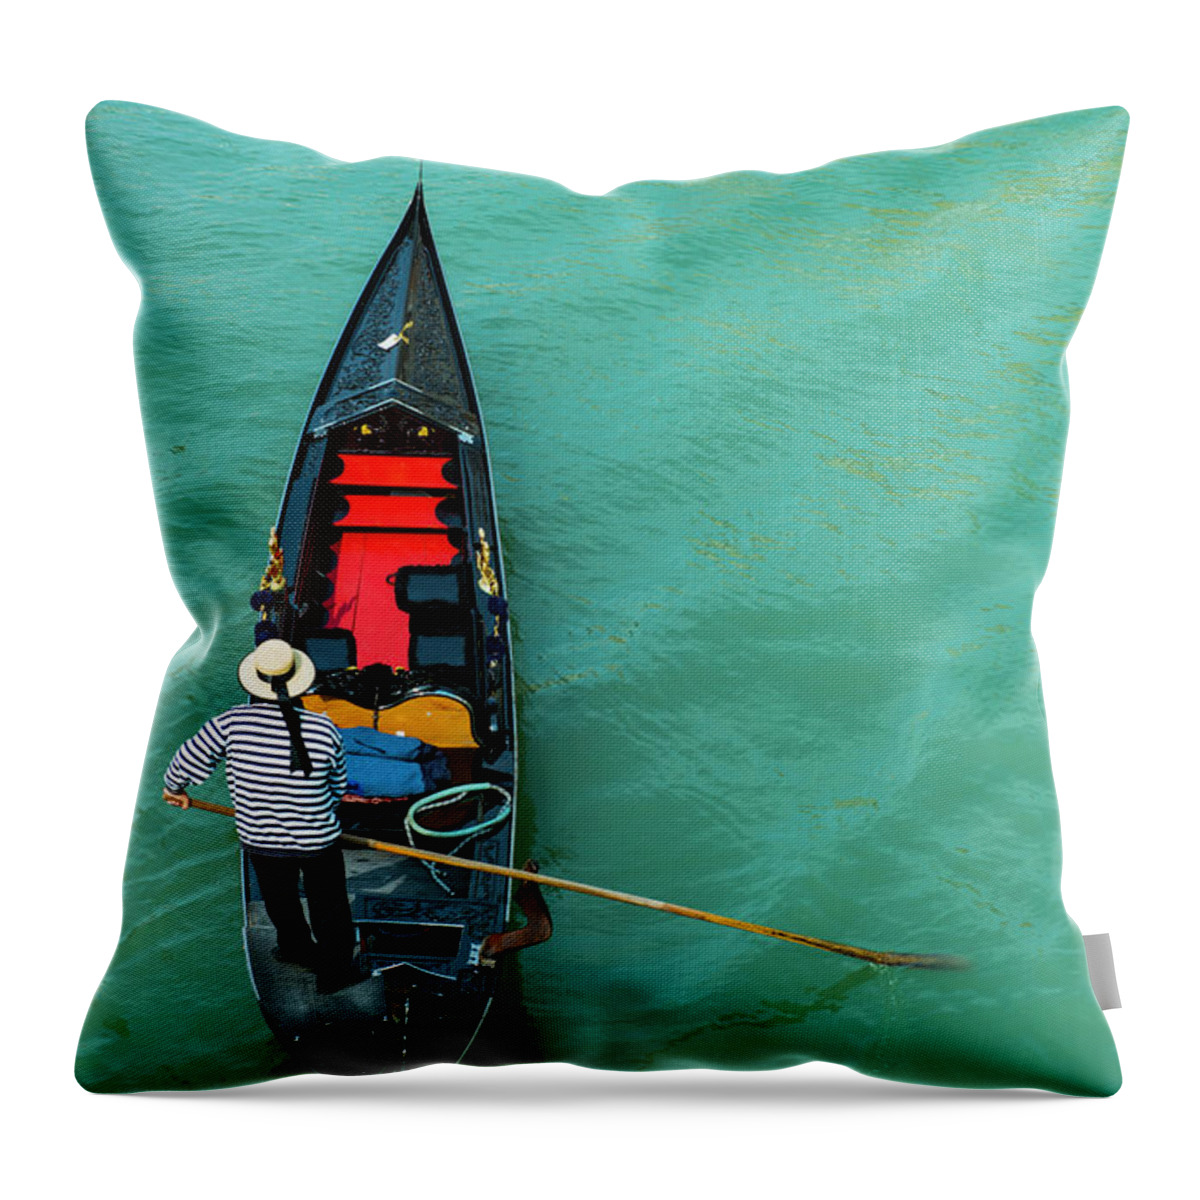 People Throw Pillow featuring the photograph Typical Gondola In Venice - Italy by Caracterdesign